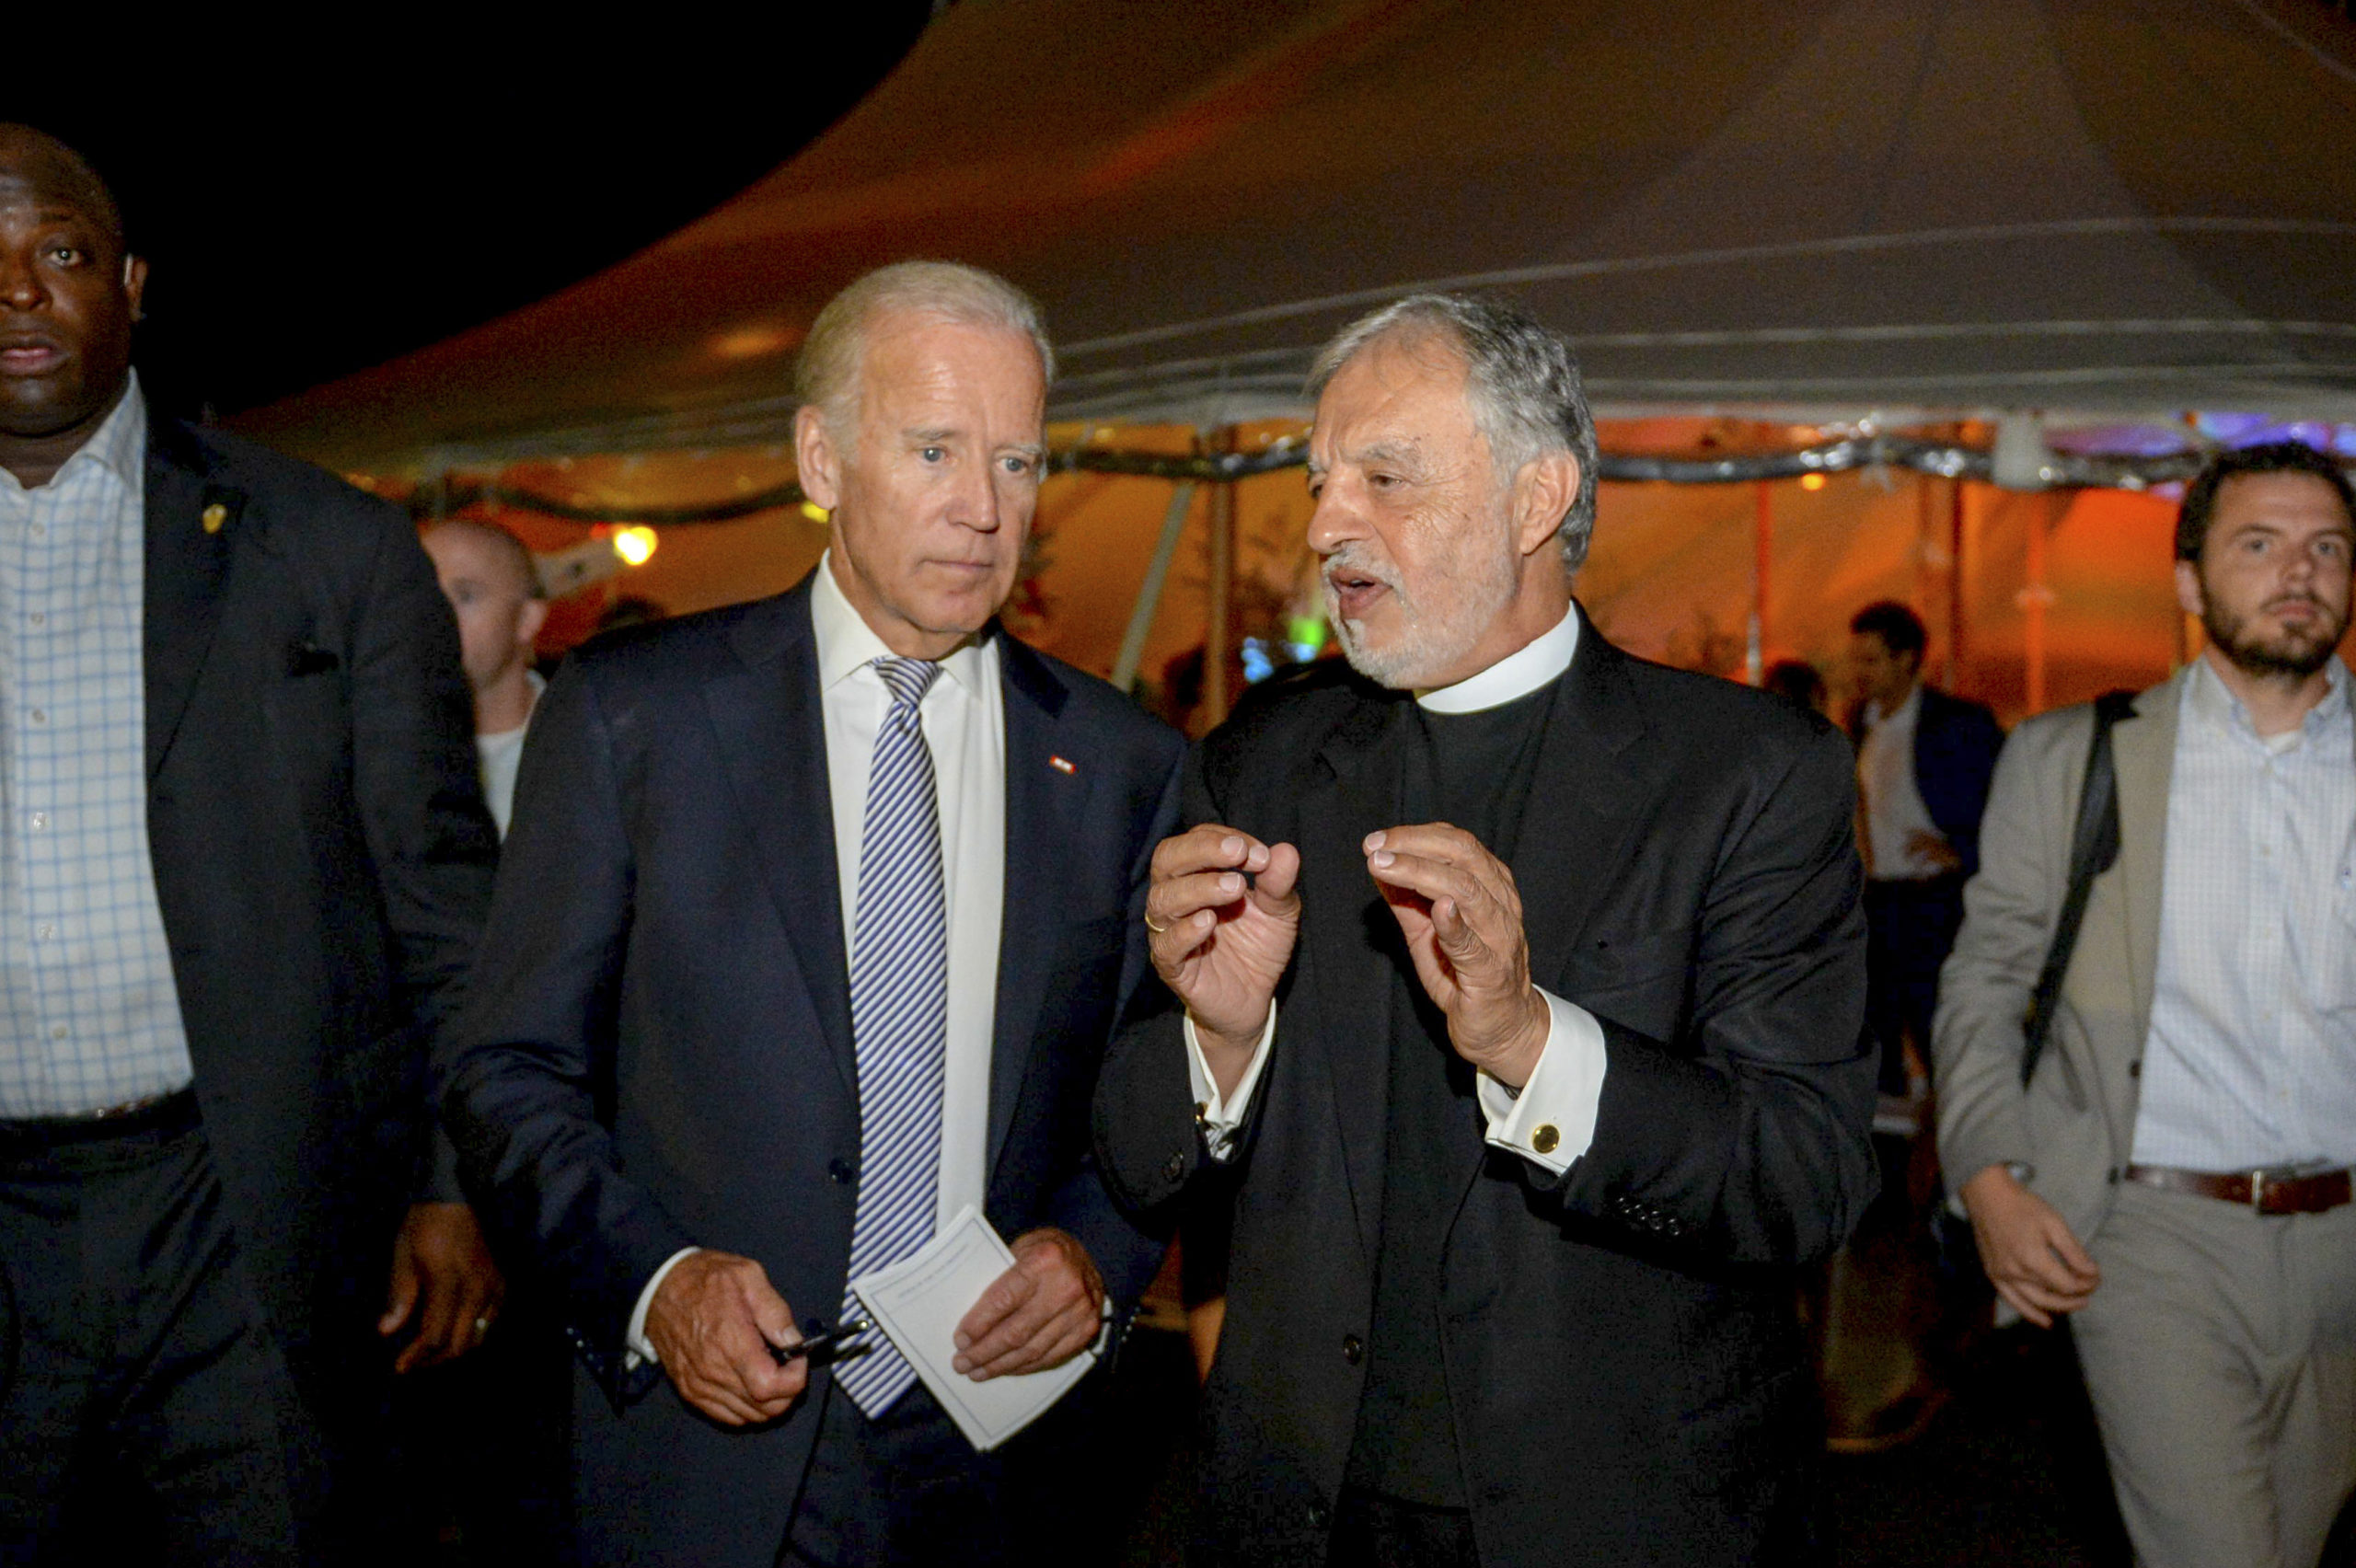 Then-Vice President Joe Biden with Father Alex Karloutsos at the 2016 Blue Dream Gala at the the Dormition of the Virgin Mary Greek Orthodox Church of the Hamptons. JOHN MINDALA